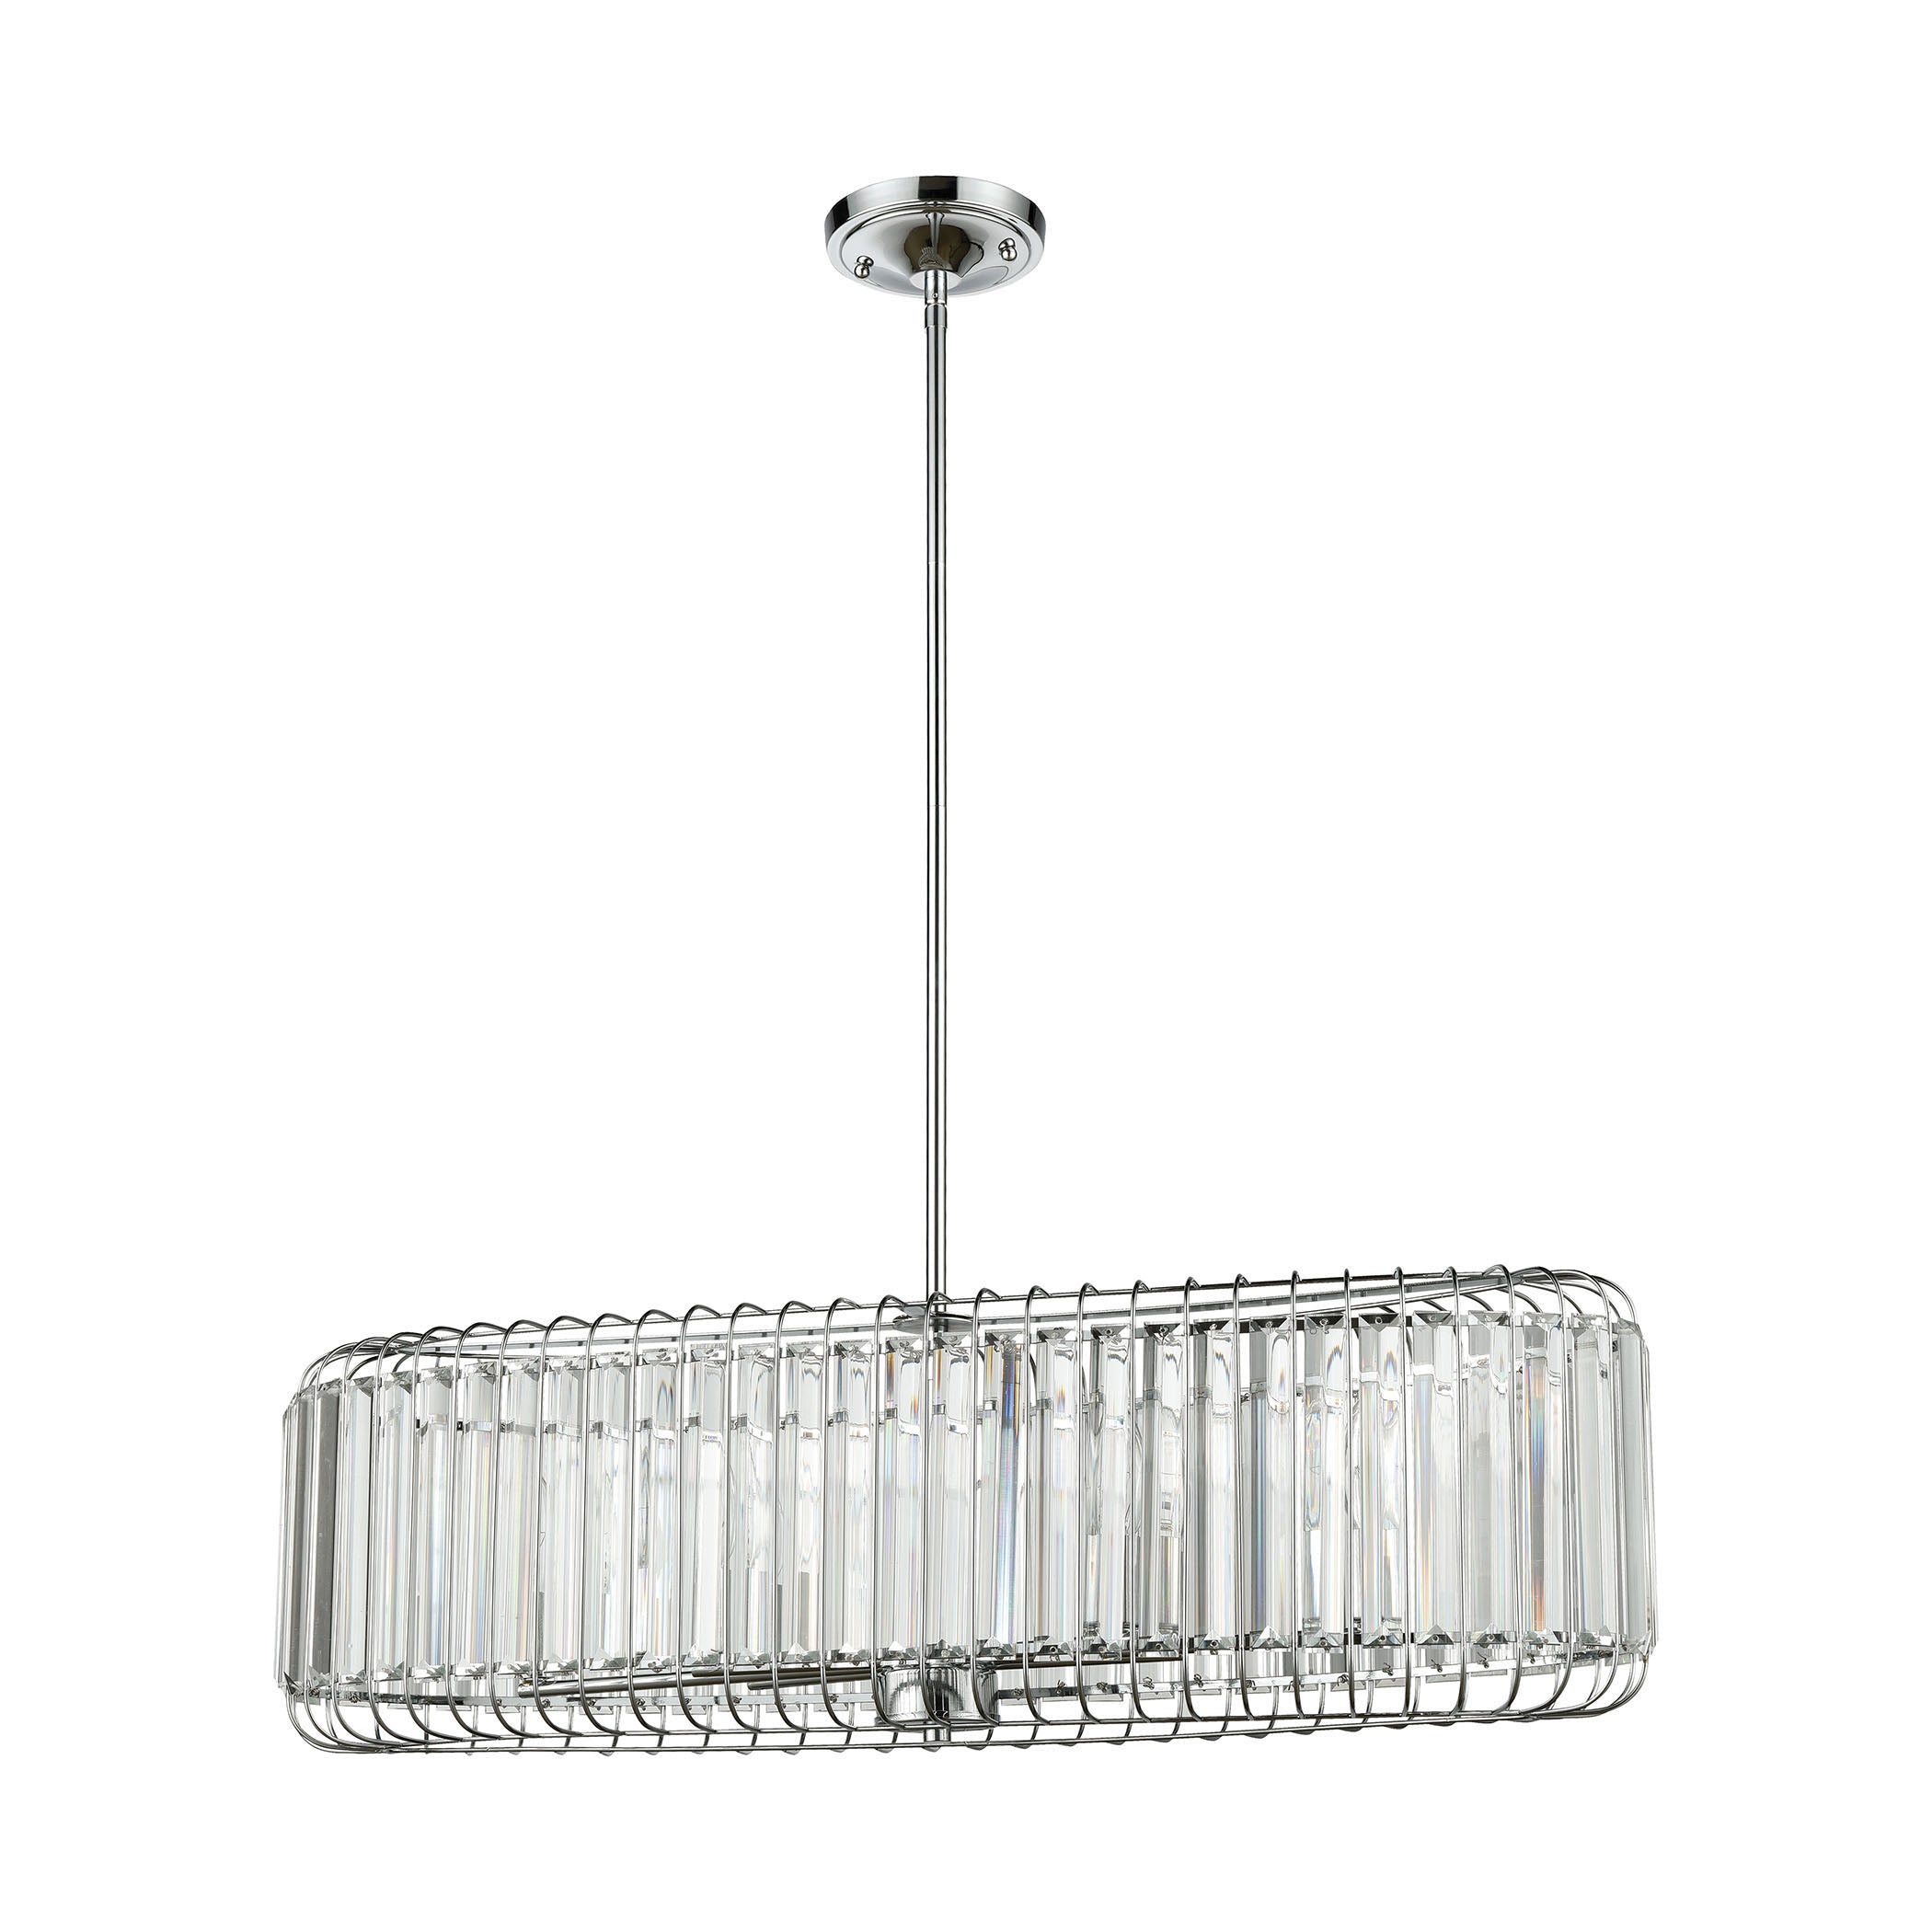 ELK Lighting 81326/6 Beaumont 6-Light Linear Chandelier in Polished Chrome with Clear Crystal